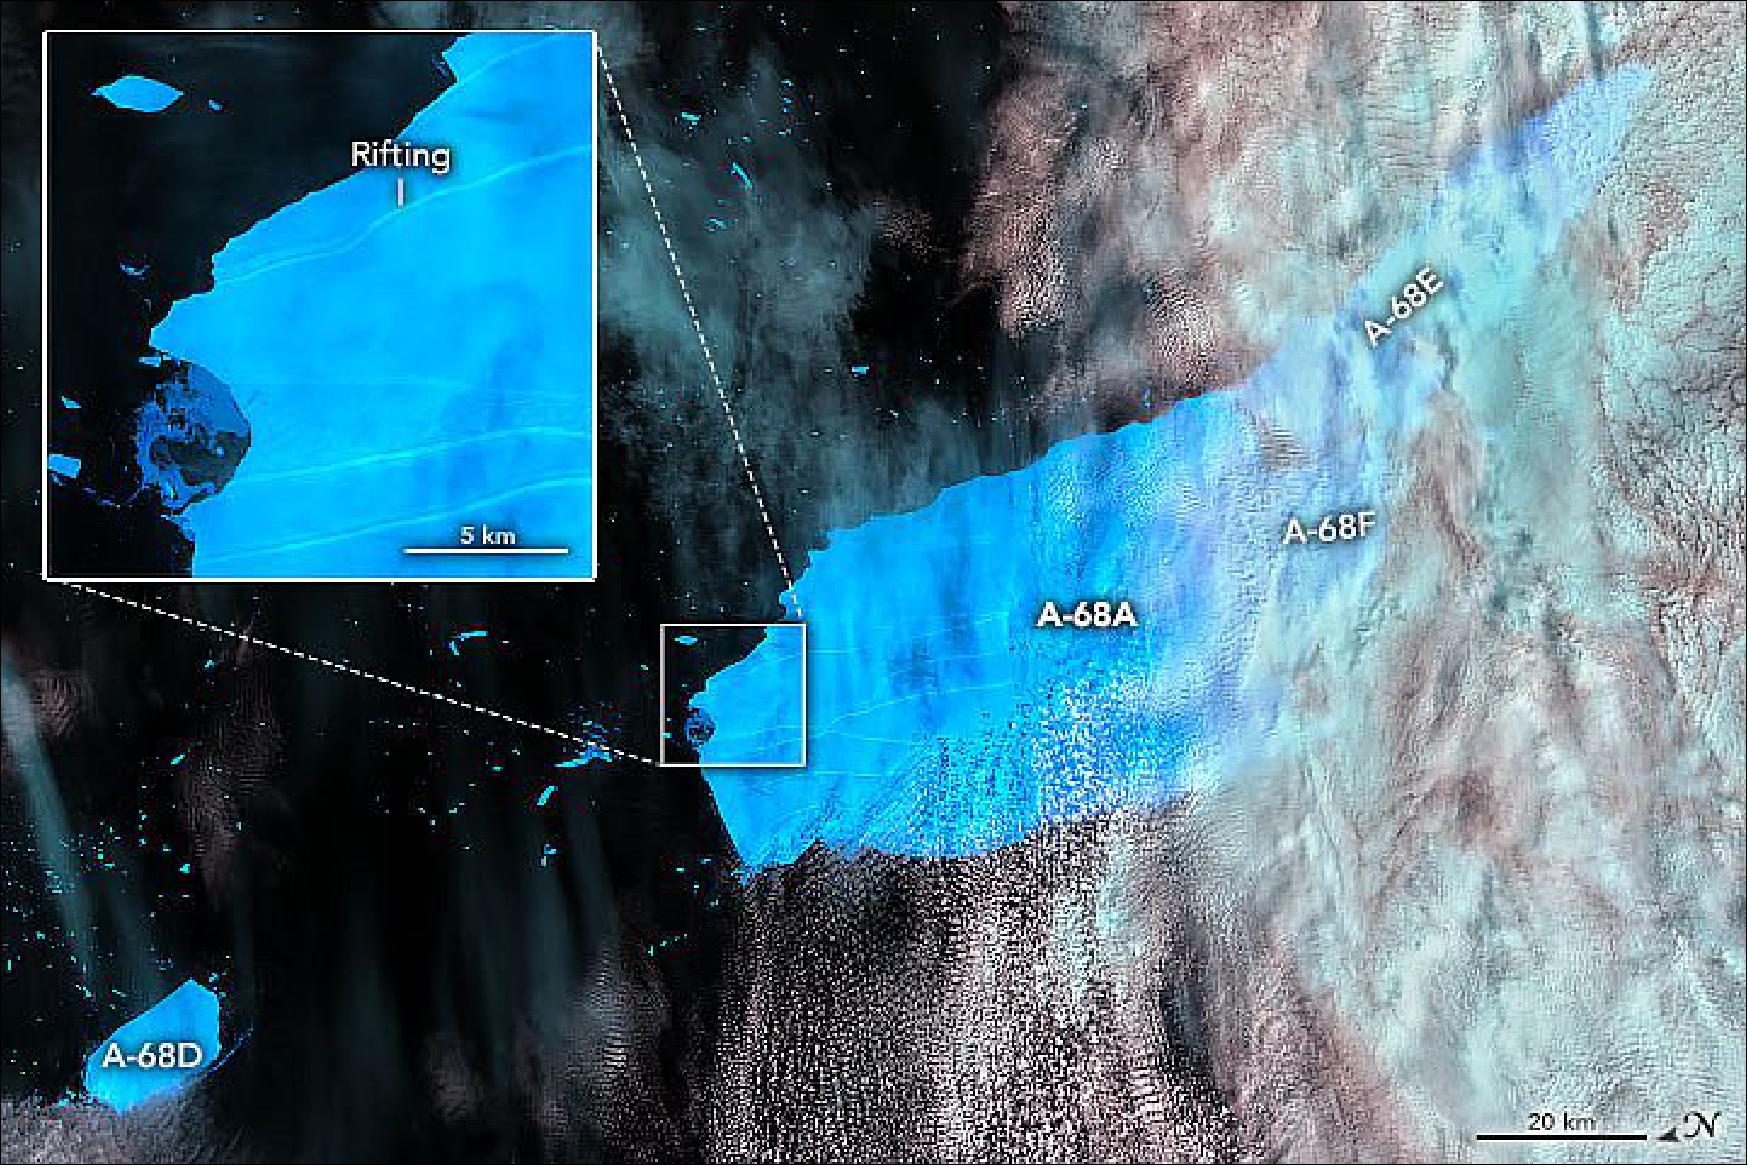 Figure 51: NASA's MODIS instruments also captured daily images of the berg, some of which you can see in this time-lapse sequence. Iceberg A-68A is still a behemoth iceberg, but it is changing fast. During the berg’s turn, a piece broke off and became iceberg A-68D. On December 22, the U.S. National Ice Center announced that two more large pieces broke away: icebergs A-68E and A-68F. The pieces are visible in the image, acquired on December 23, 2020, by OLI on Landsat-8. The image is false-color (bands 6-5-4) to help differentiate clouds (light blue-white) and ice (dark blue), image credit: NASA Earth Observatory